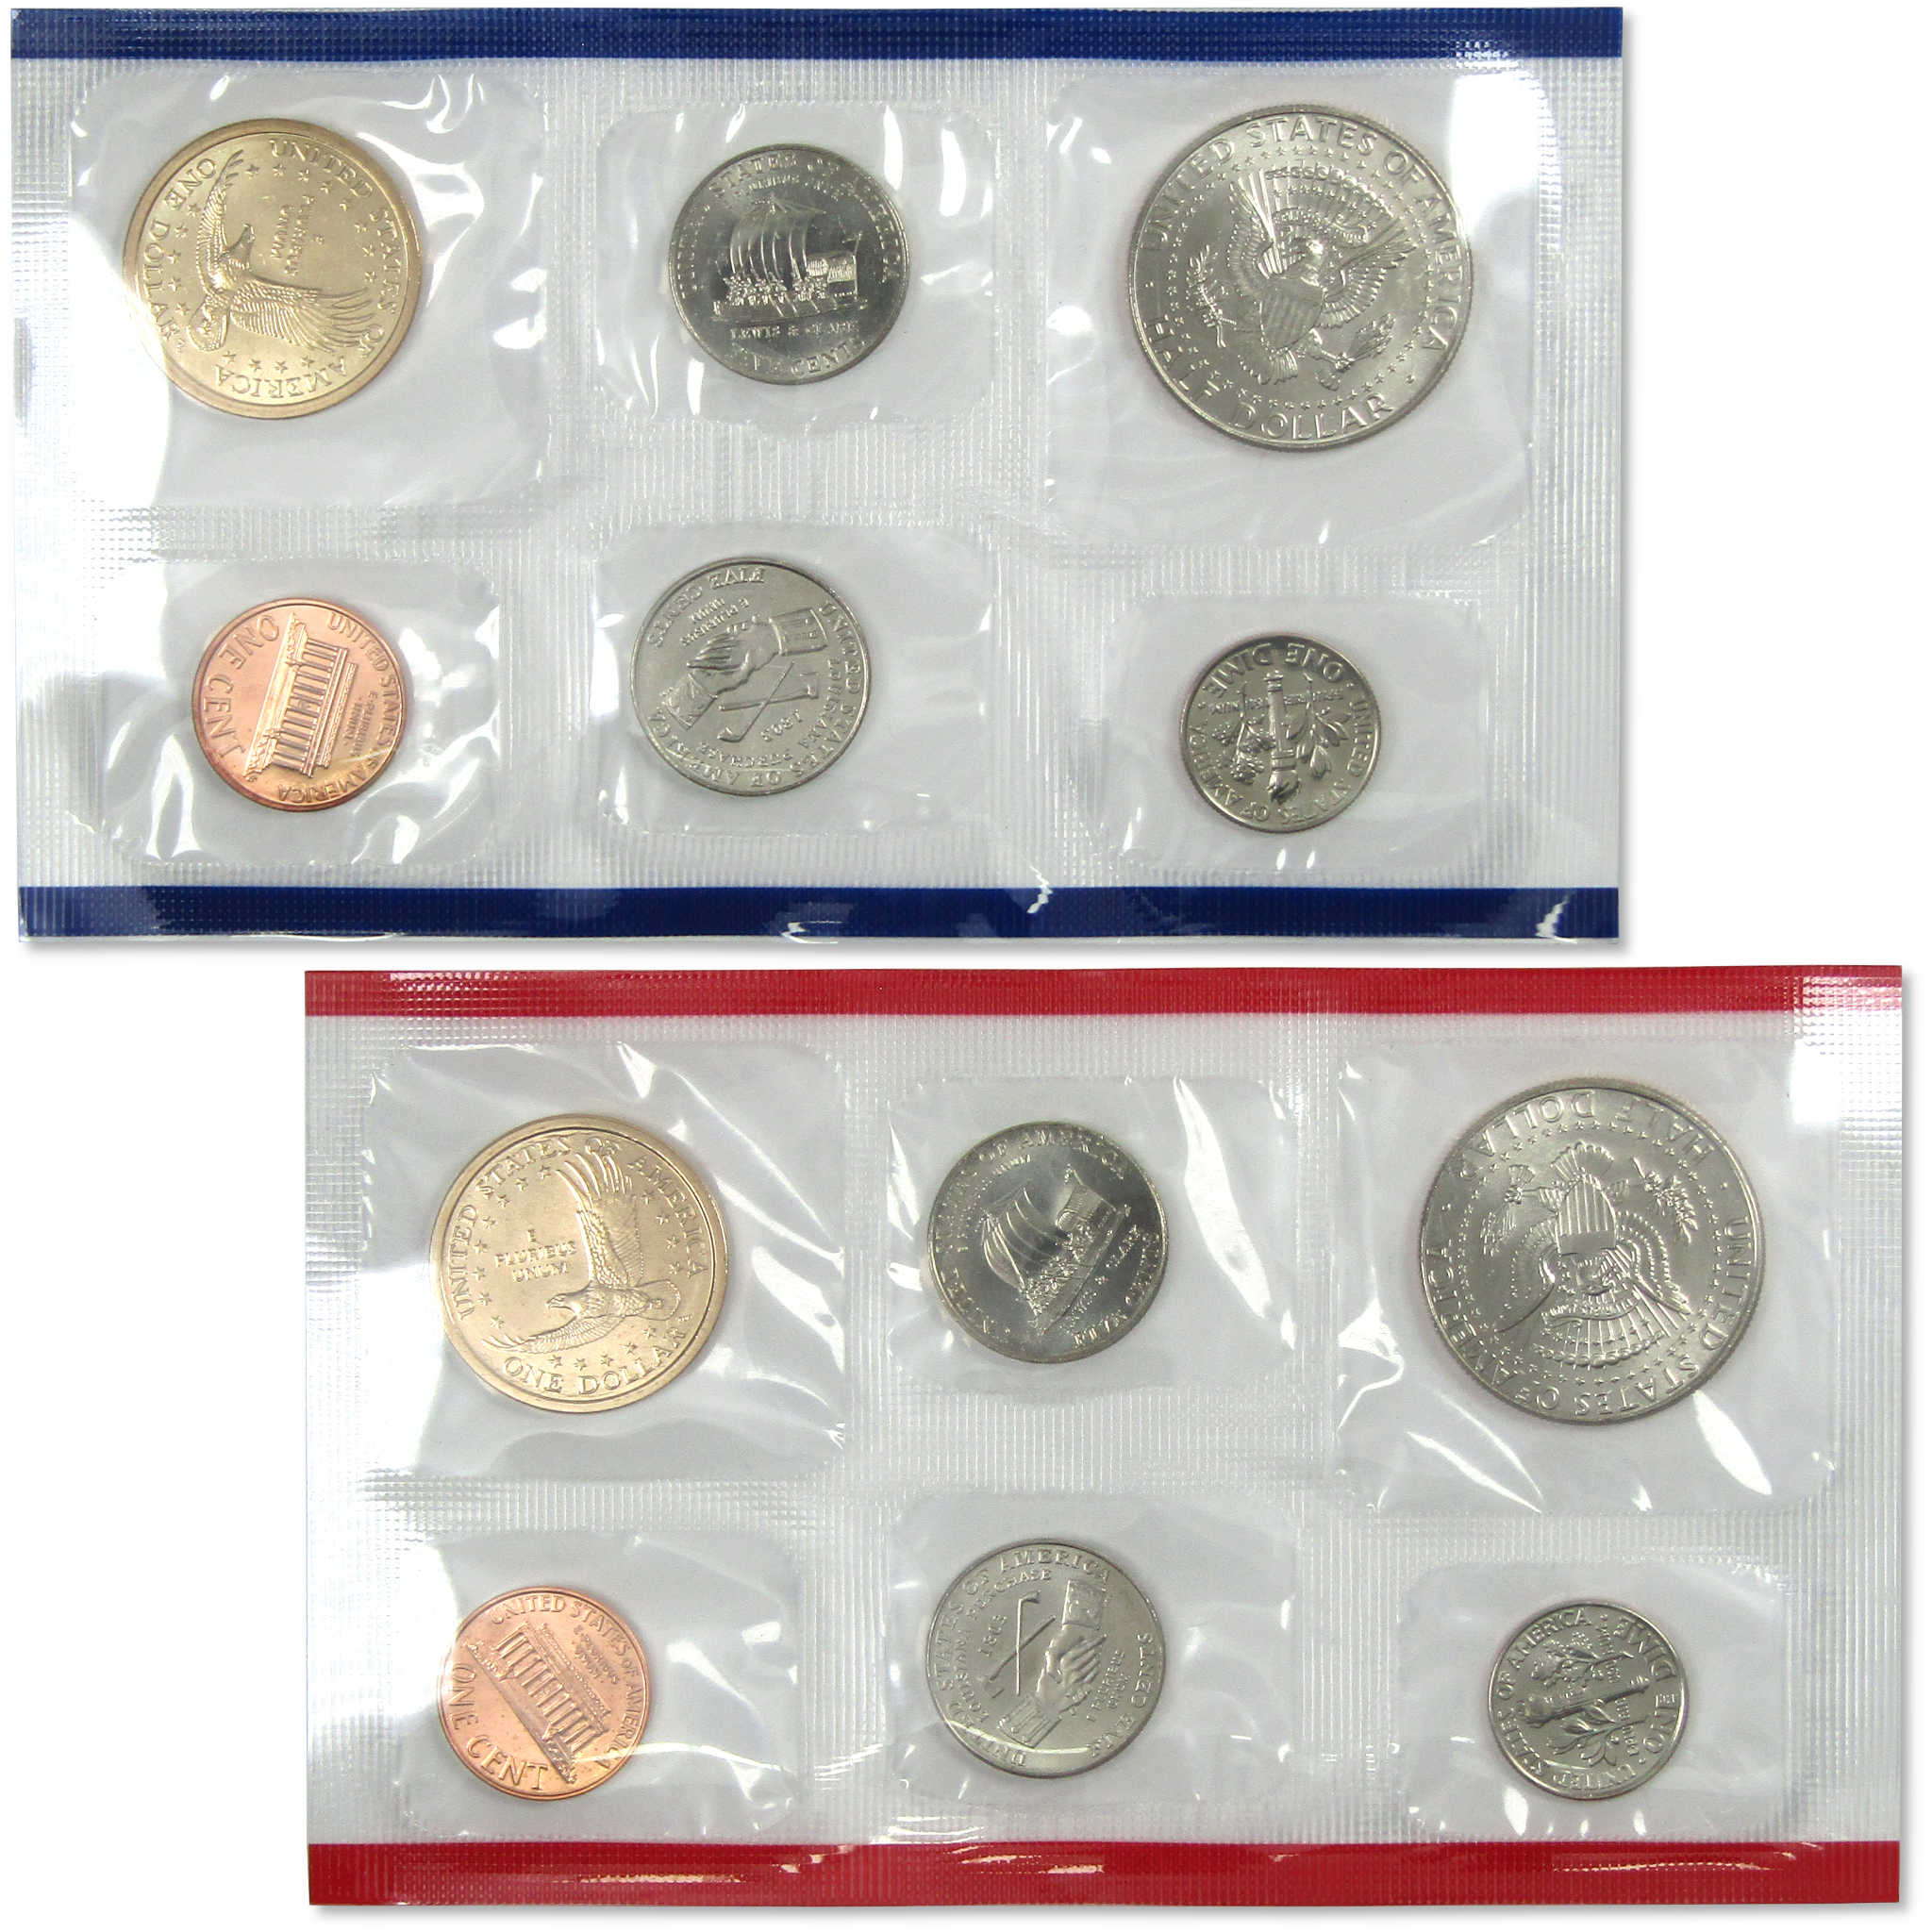 2004 Uncirculated Coin Set U.S Mint Government Packaging OGP COA